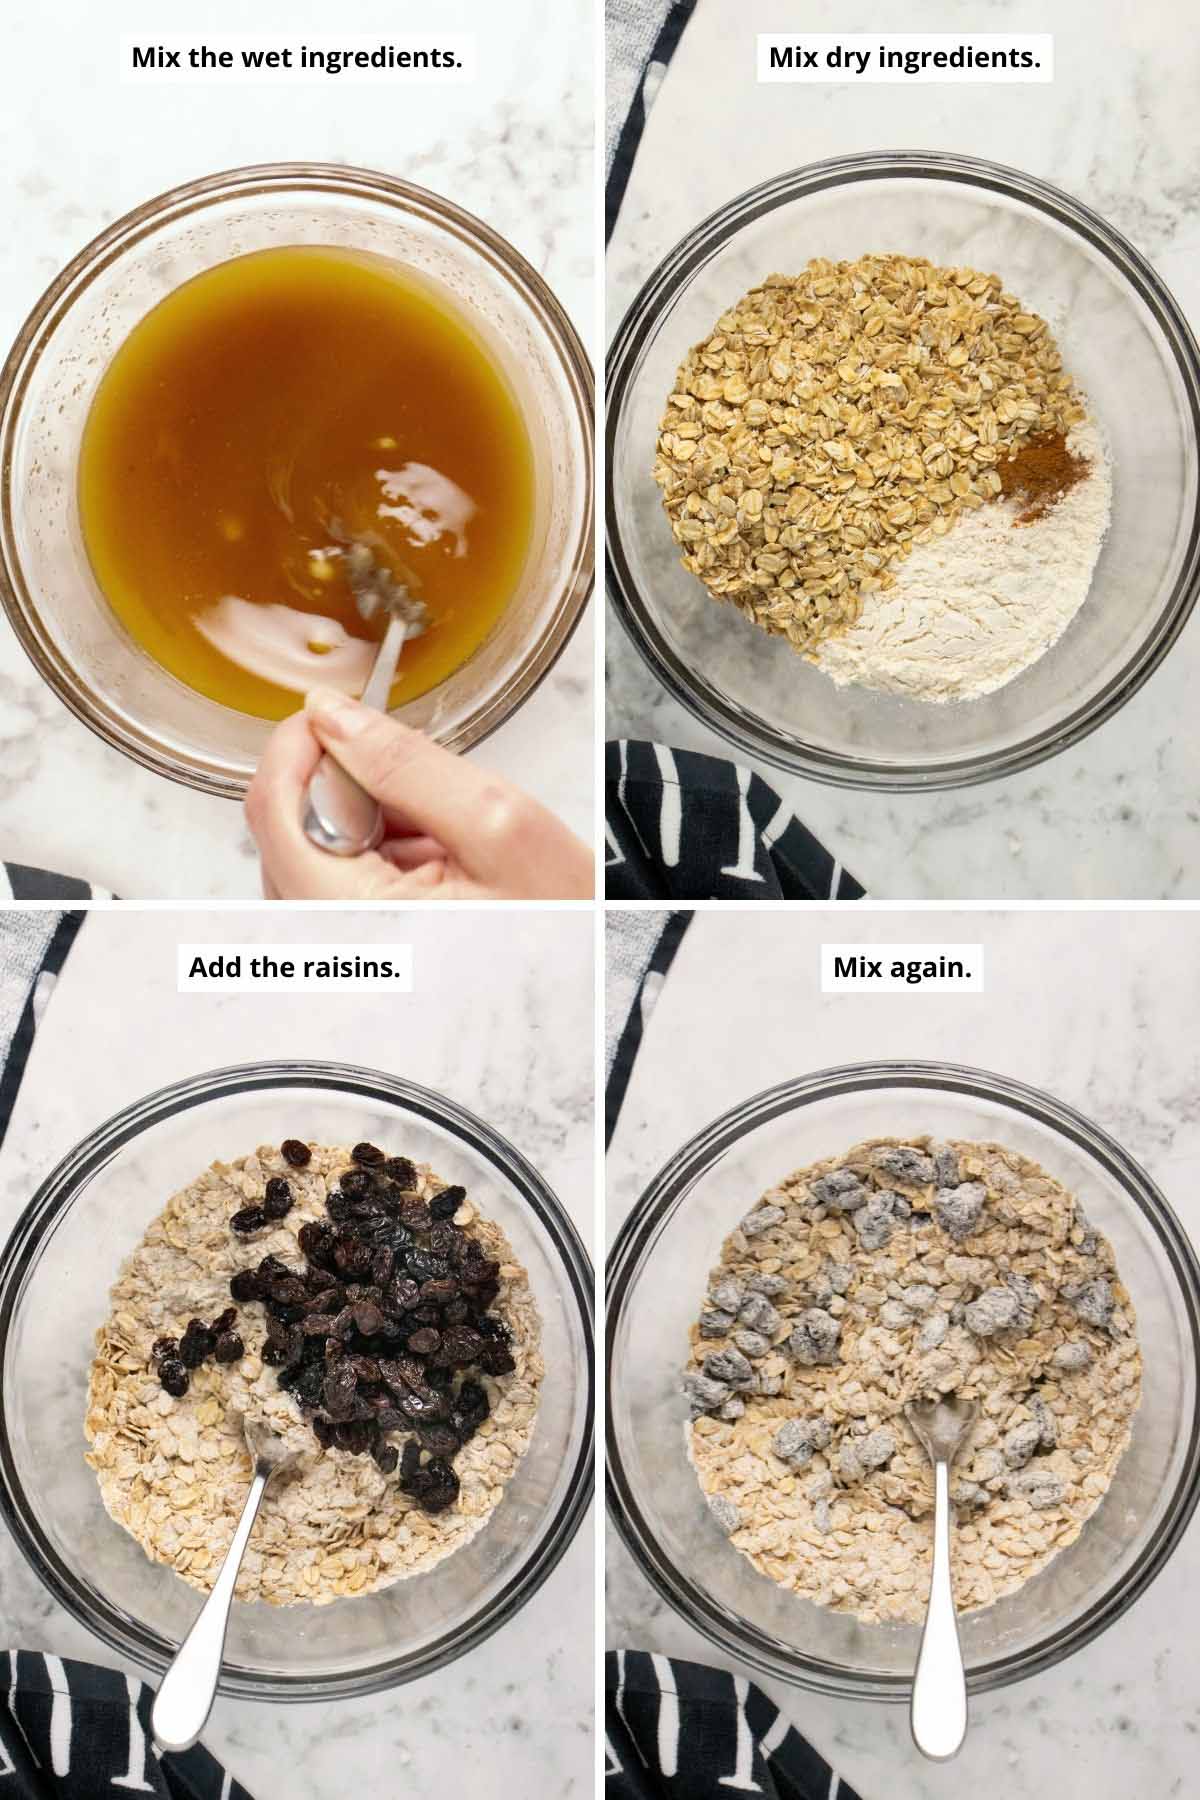 image collage showing mixing the wet ingredients, the dry ingredients in a bowl, adding the raisins, and the raisin mixture after mixing